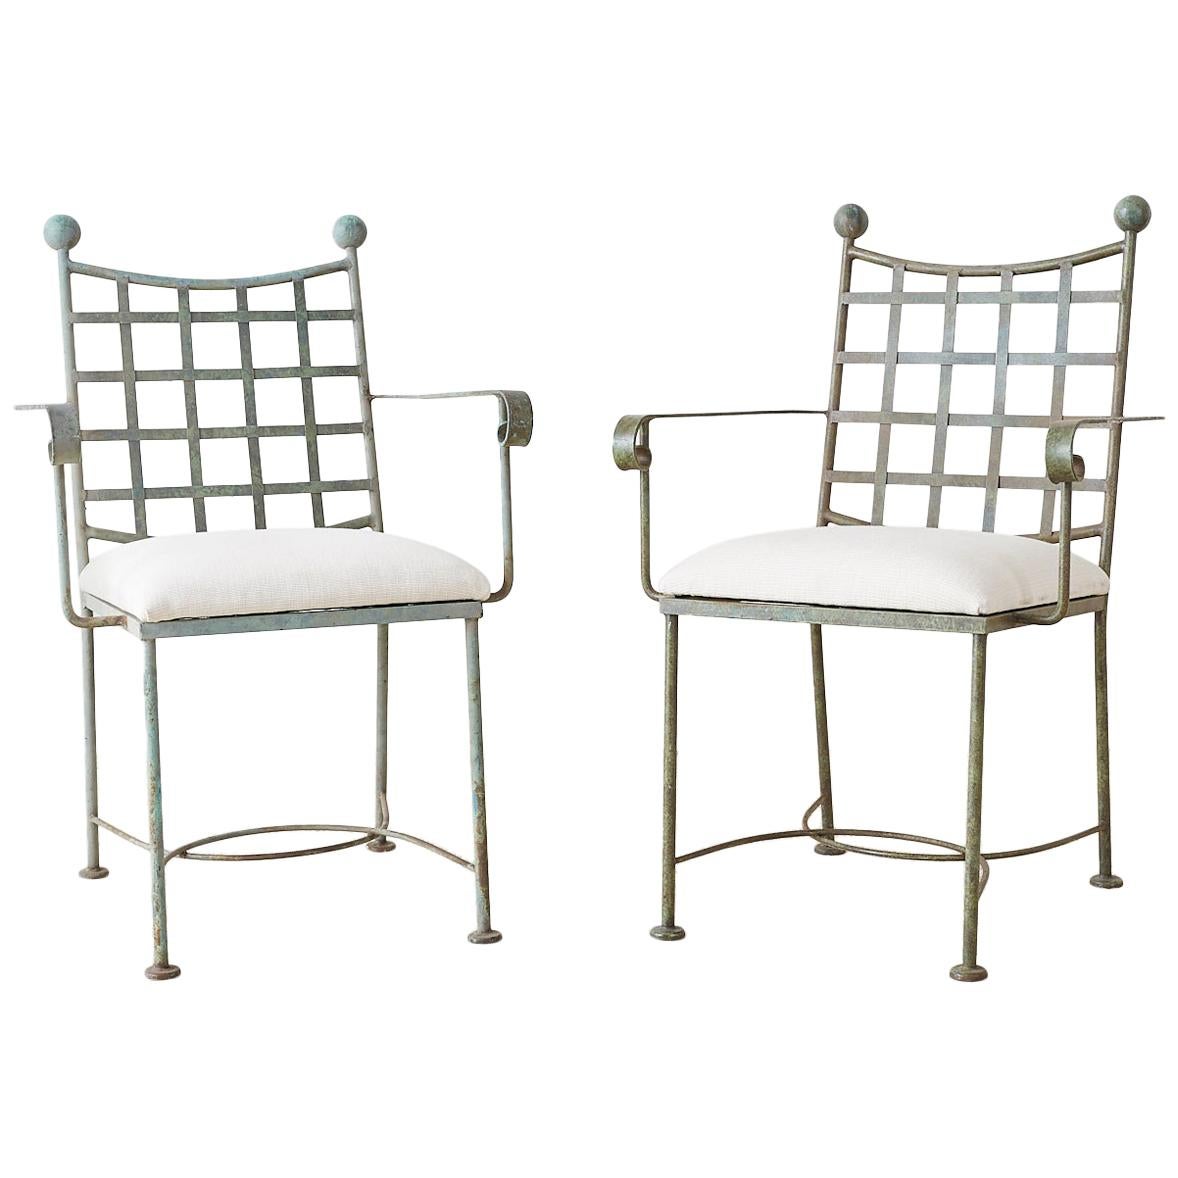 Pair of Mario Papperzini for Salterini Style Garden Chairs